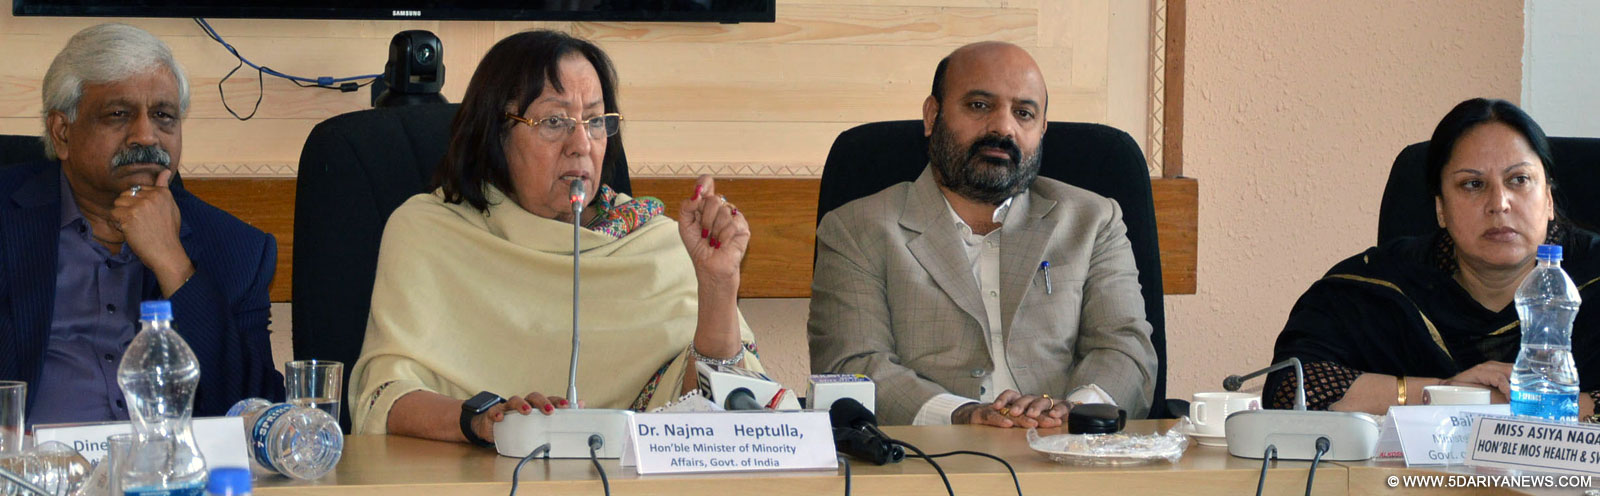 Waqf land to be commercialized to generate revenue for education : Dr Najma Heptullah